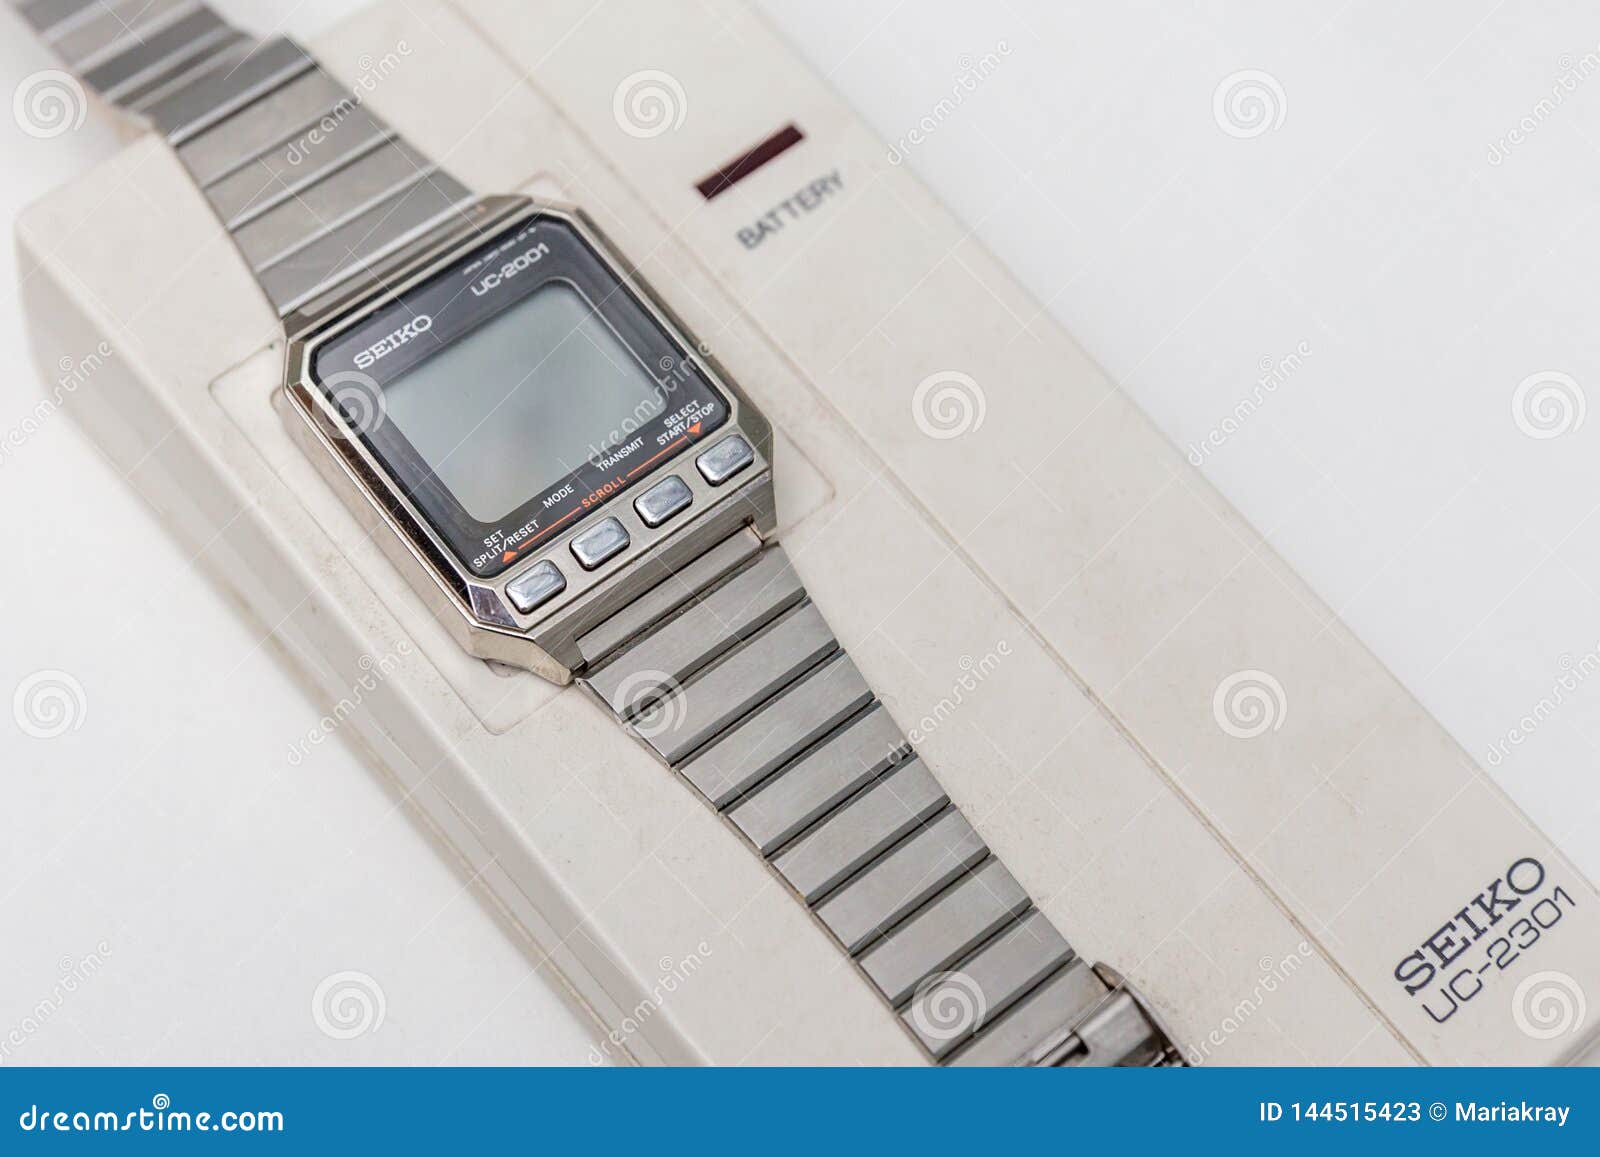 MOSCOW, RUSSIA - JUNE 11, 2018: Seiko Wrist Wath Information System  UC-2001. Watch Communicates with UC-2301 Interface Editorial Stock Photo -  Image of brand, watch: 144515423